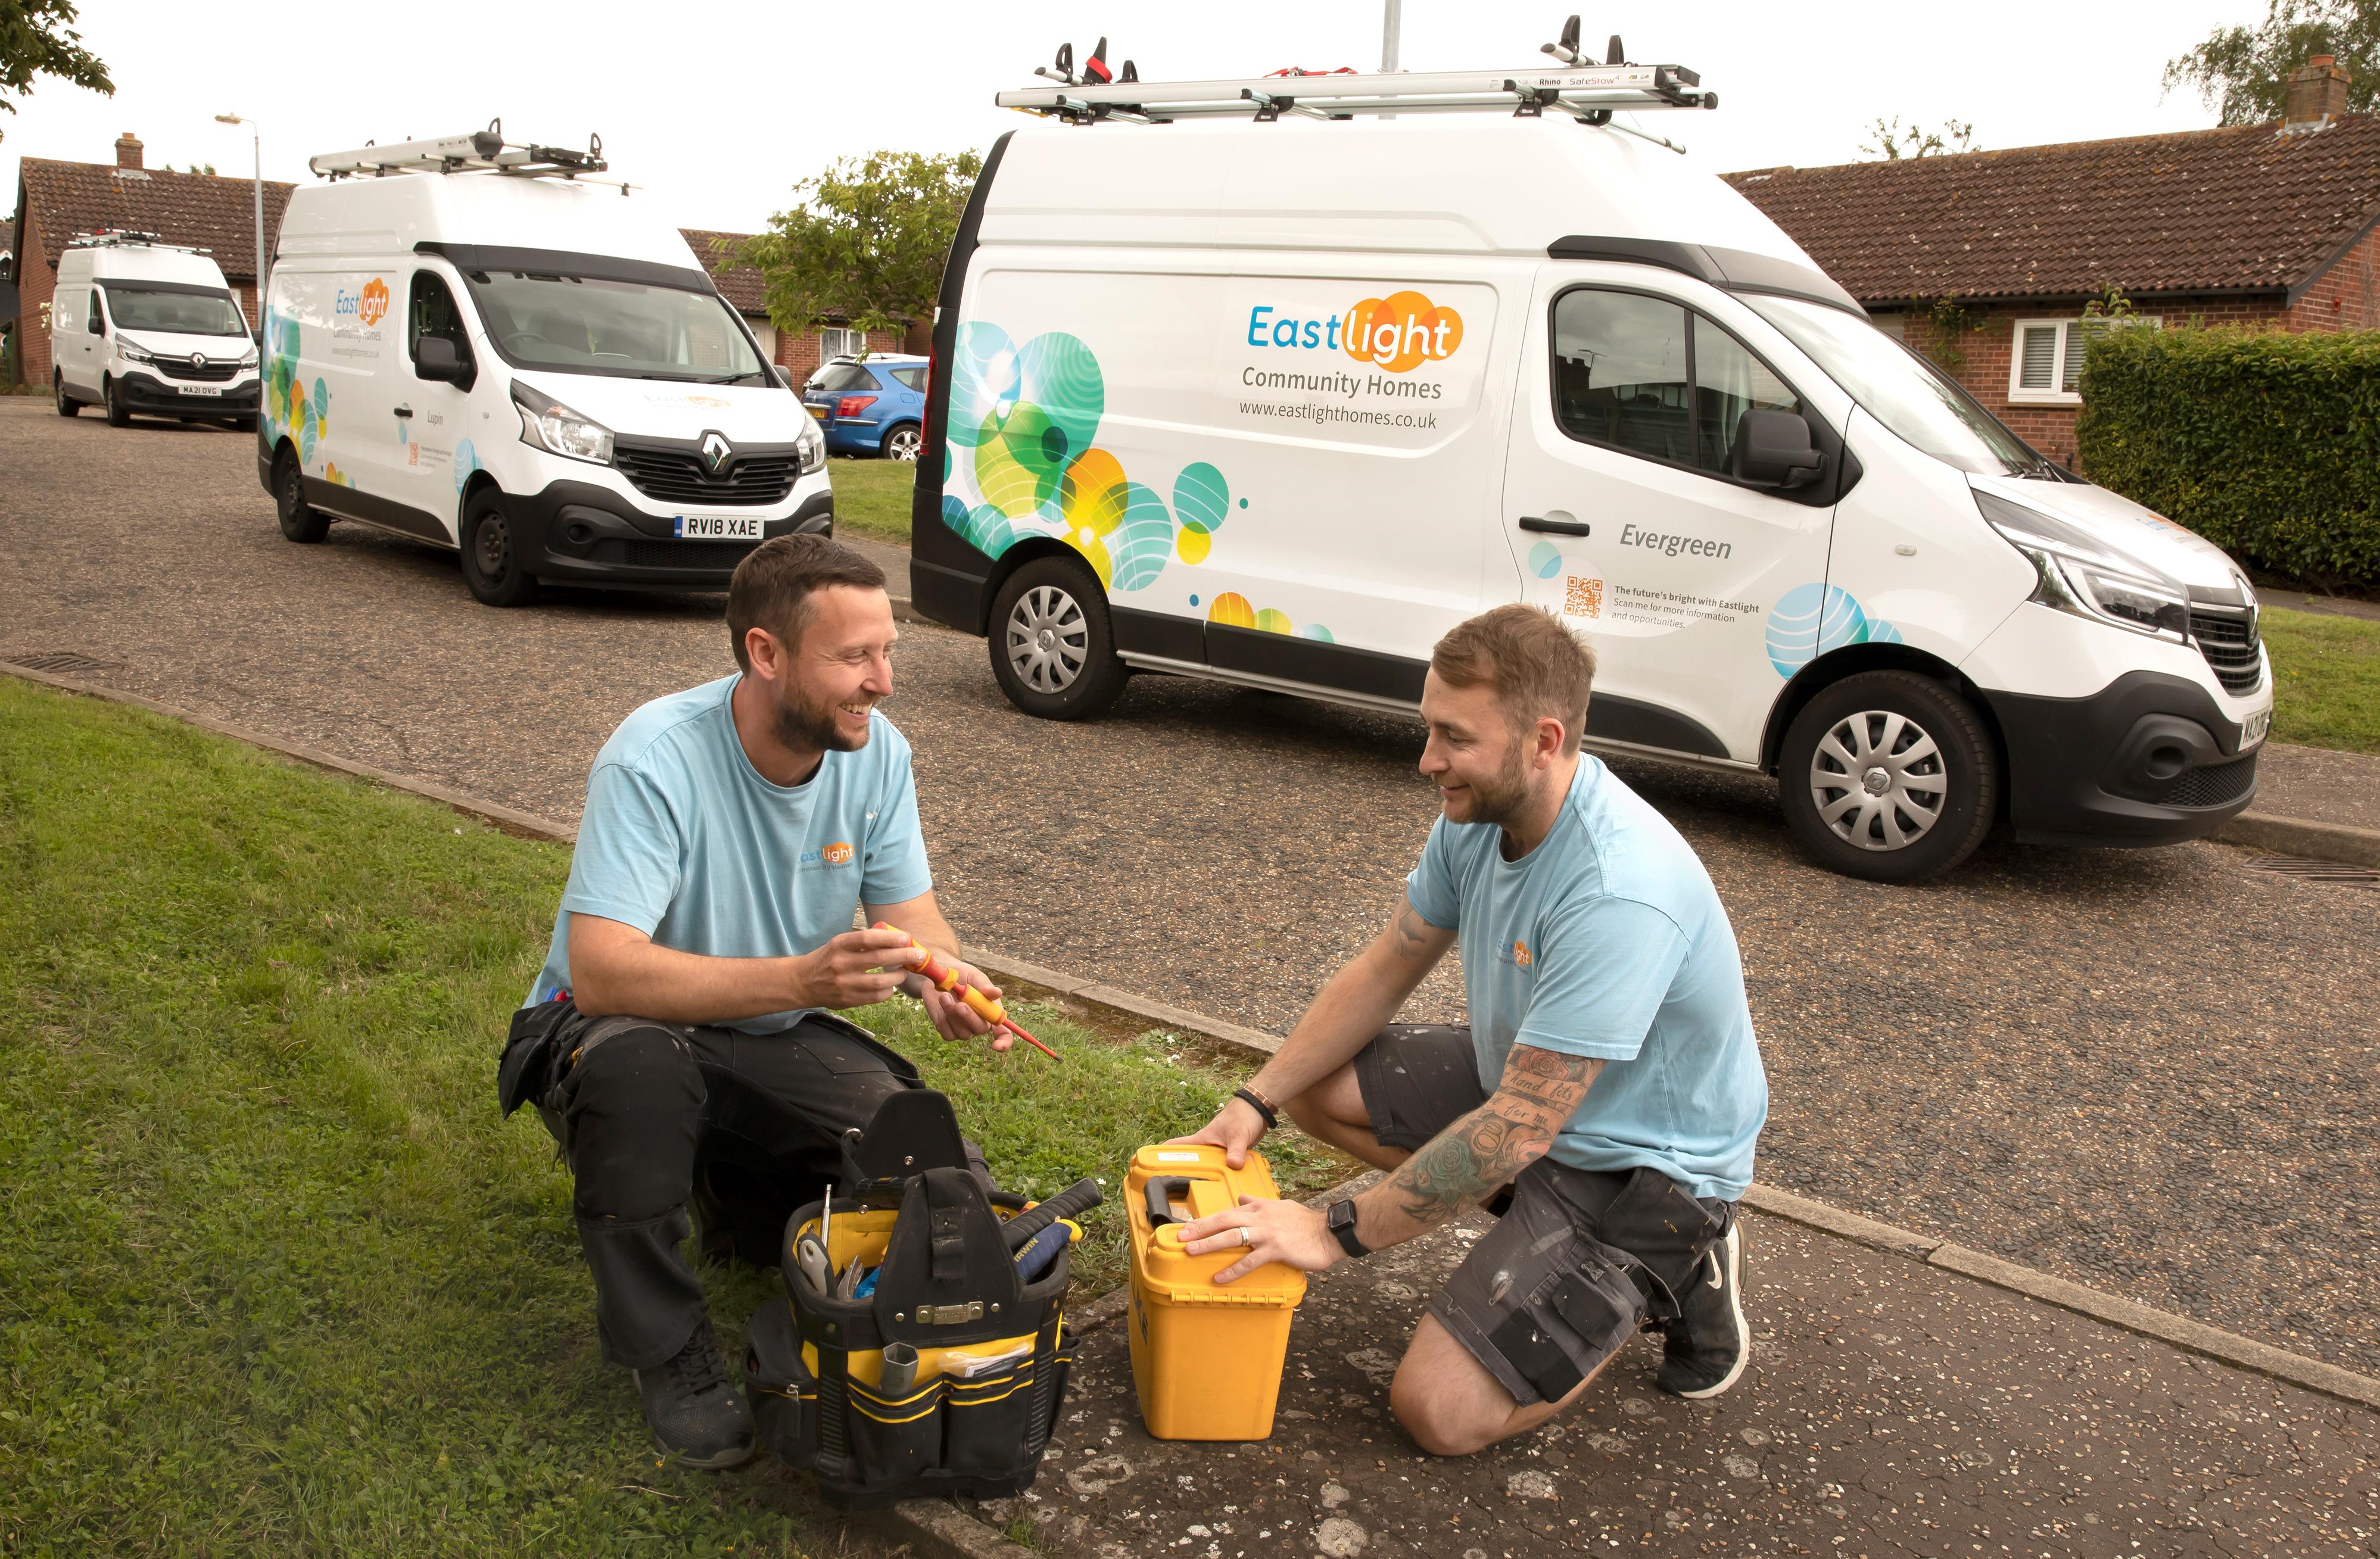 Two Eastlight tradesmen are kneeling at a toolbox on some grass. There are Eastlight vans parked on the road behind them.